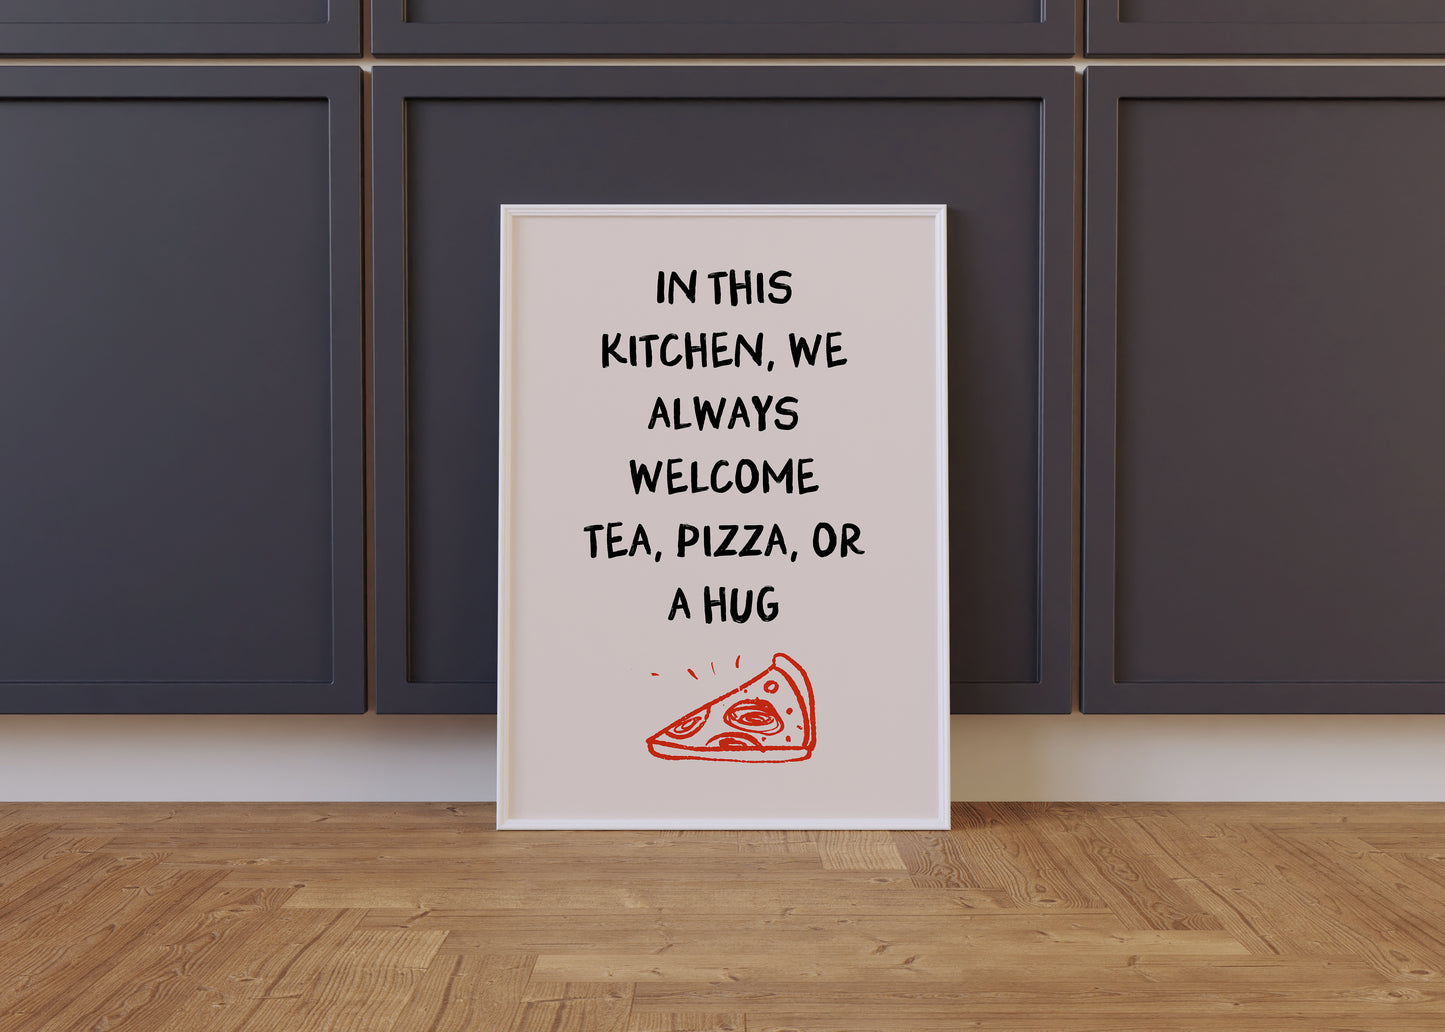 In This Kitchen We Always Welcome Tea, Pizza or a Hug Print